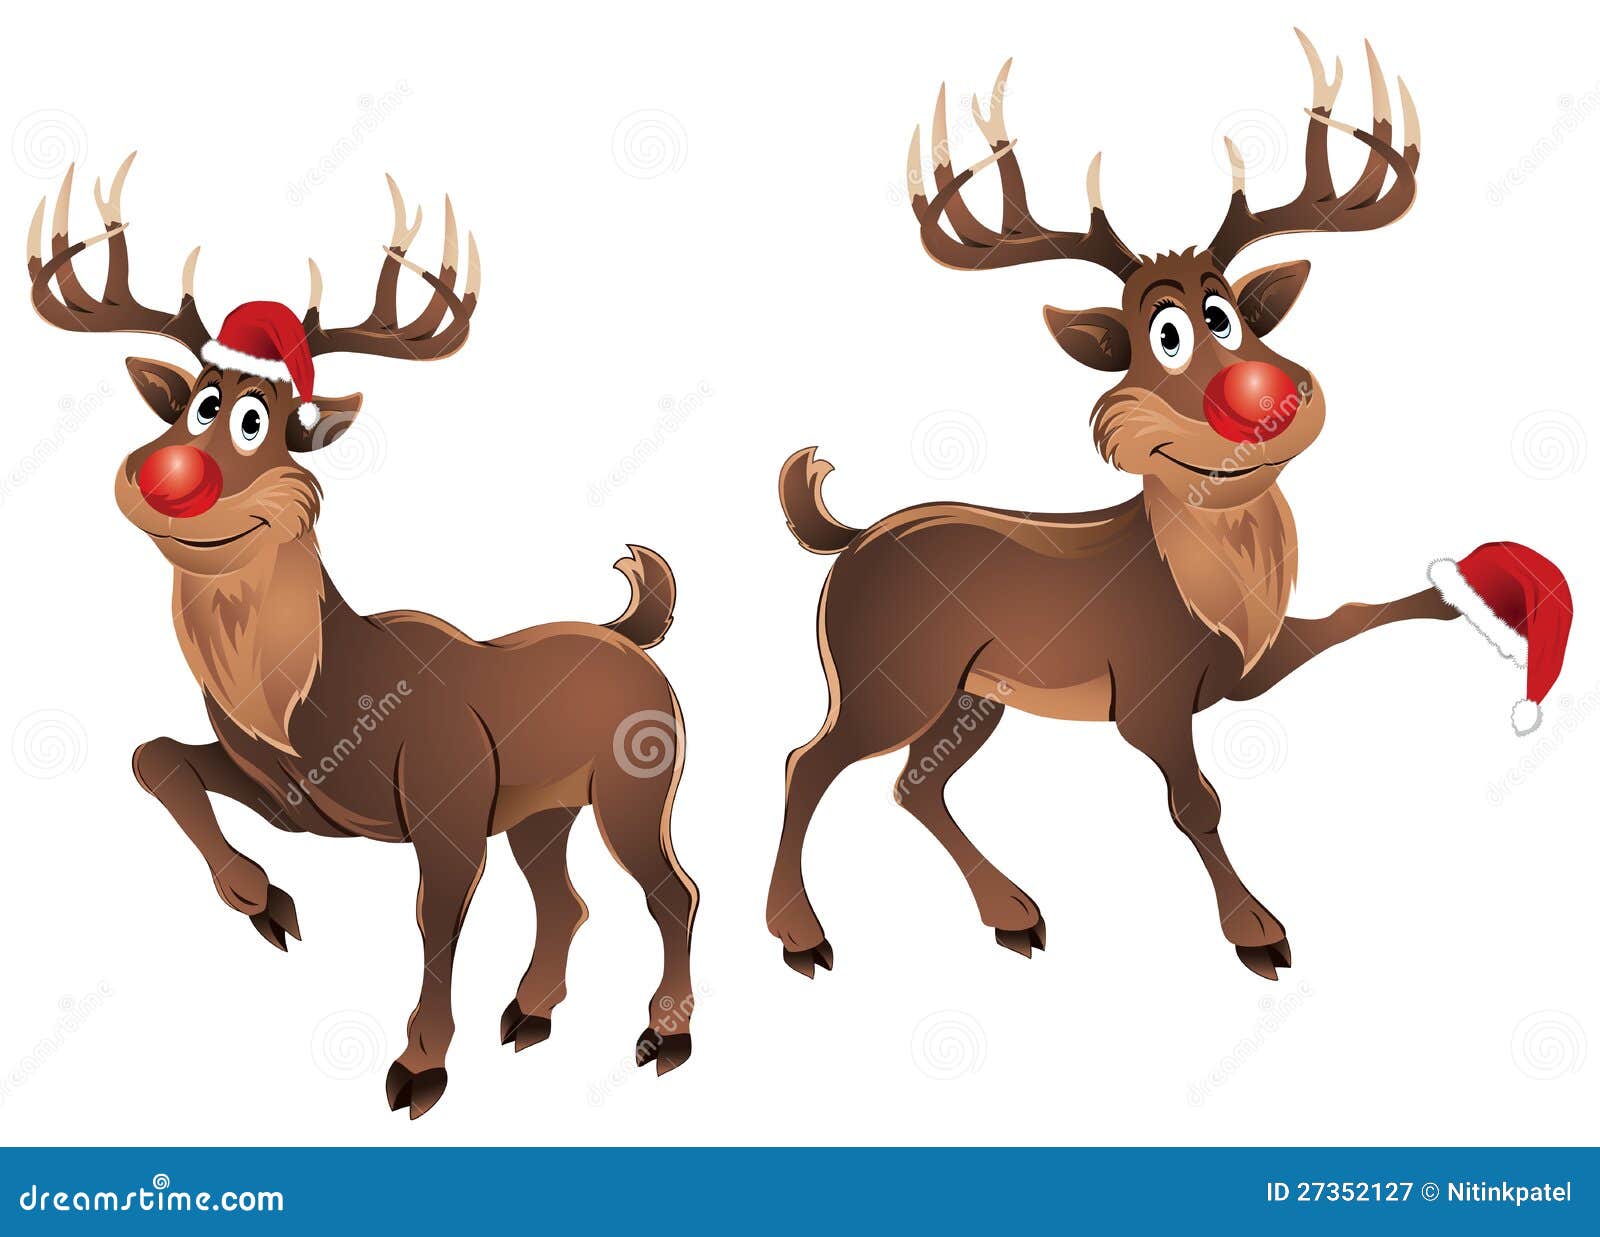 Rudolph The Reindeer Dancing With Hat Royalty Free Stock 